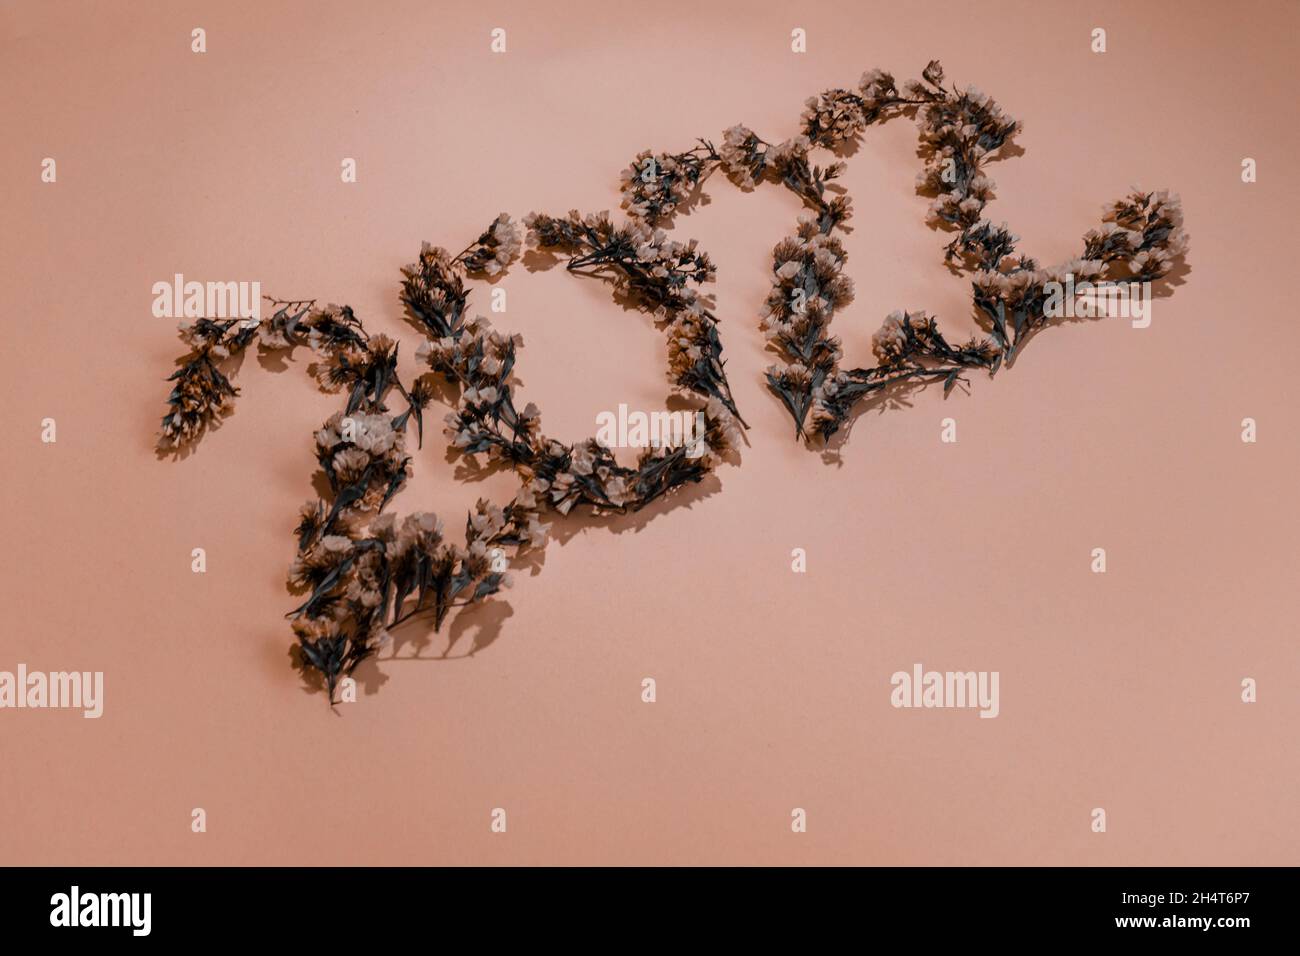 New Year. 2022 is laid out of statice dried flowers.  Stock Photo